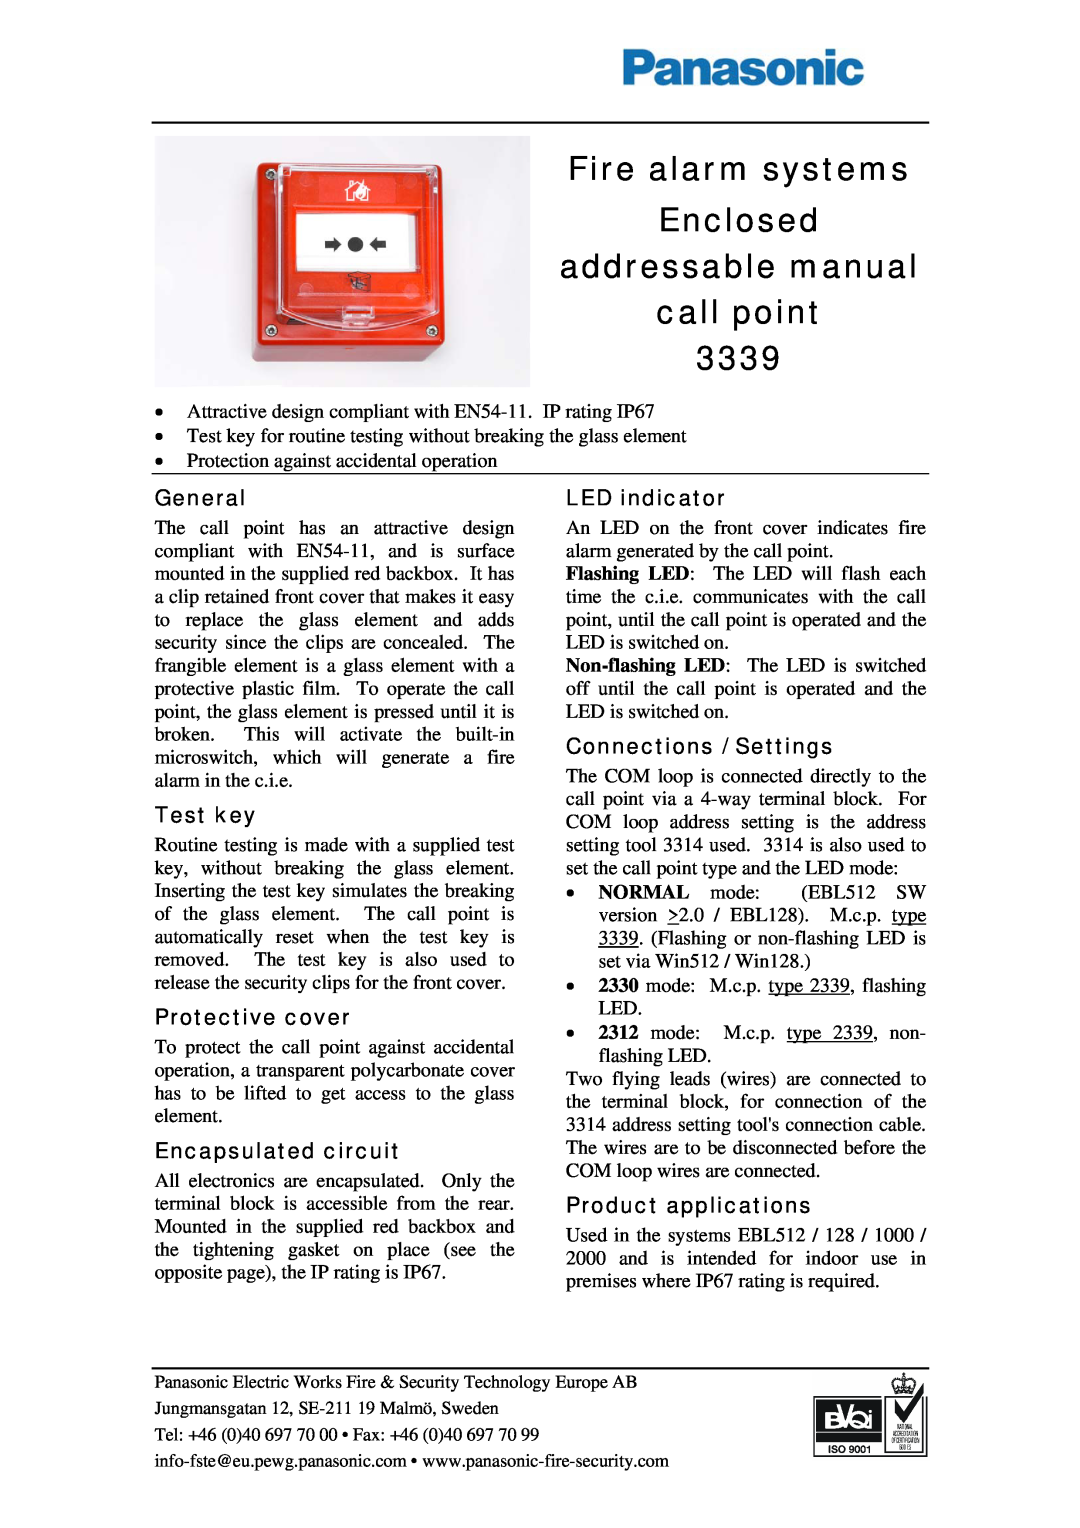 Panasonic 3339 manual Fire alarm systems Enclosed addressable manual, call point, General, Test key, Protective cover 